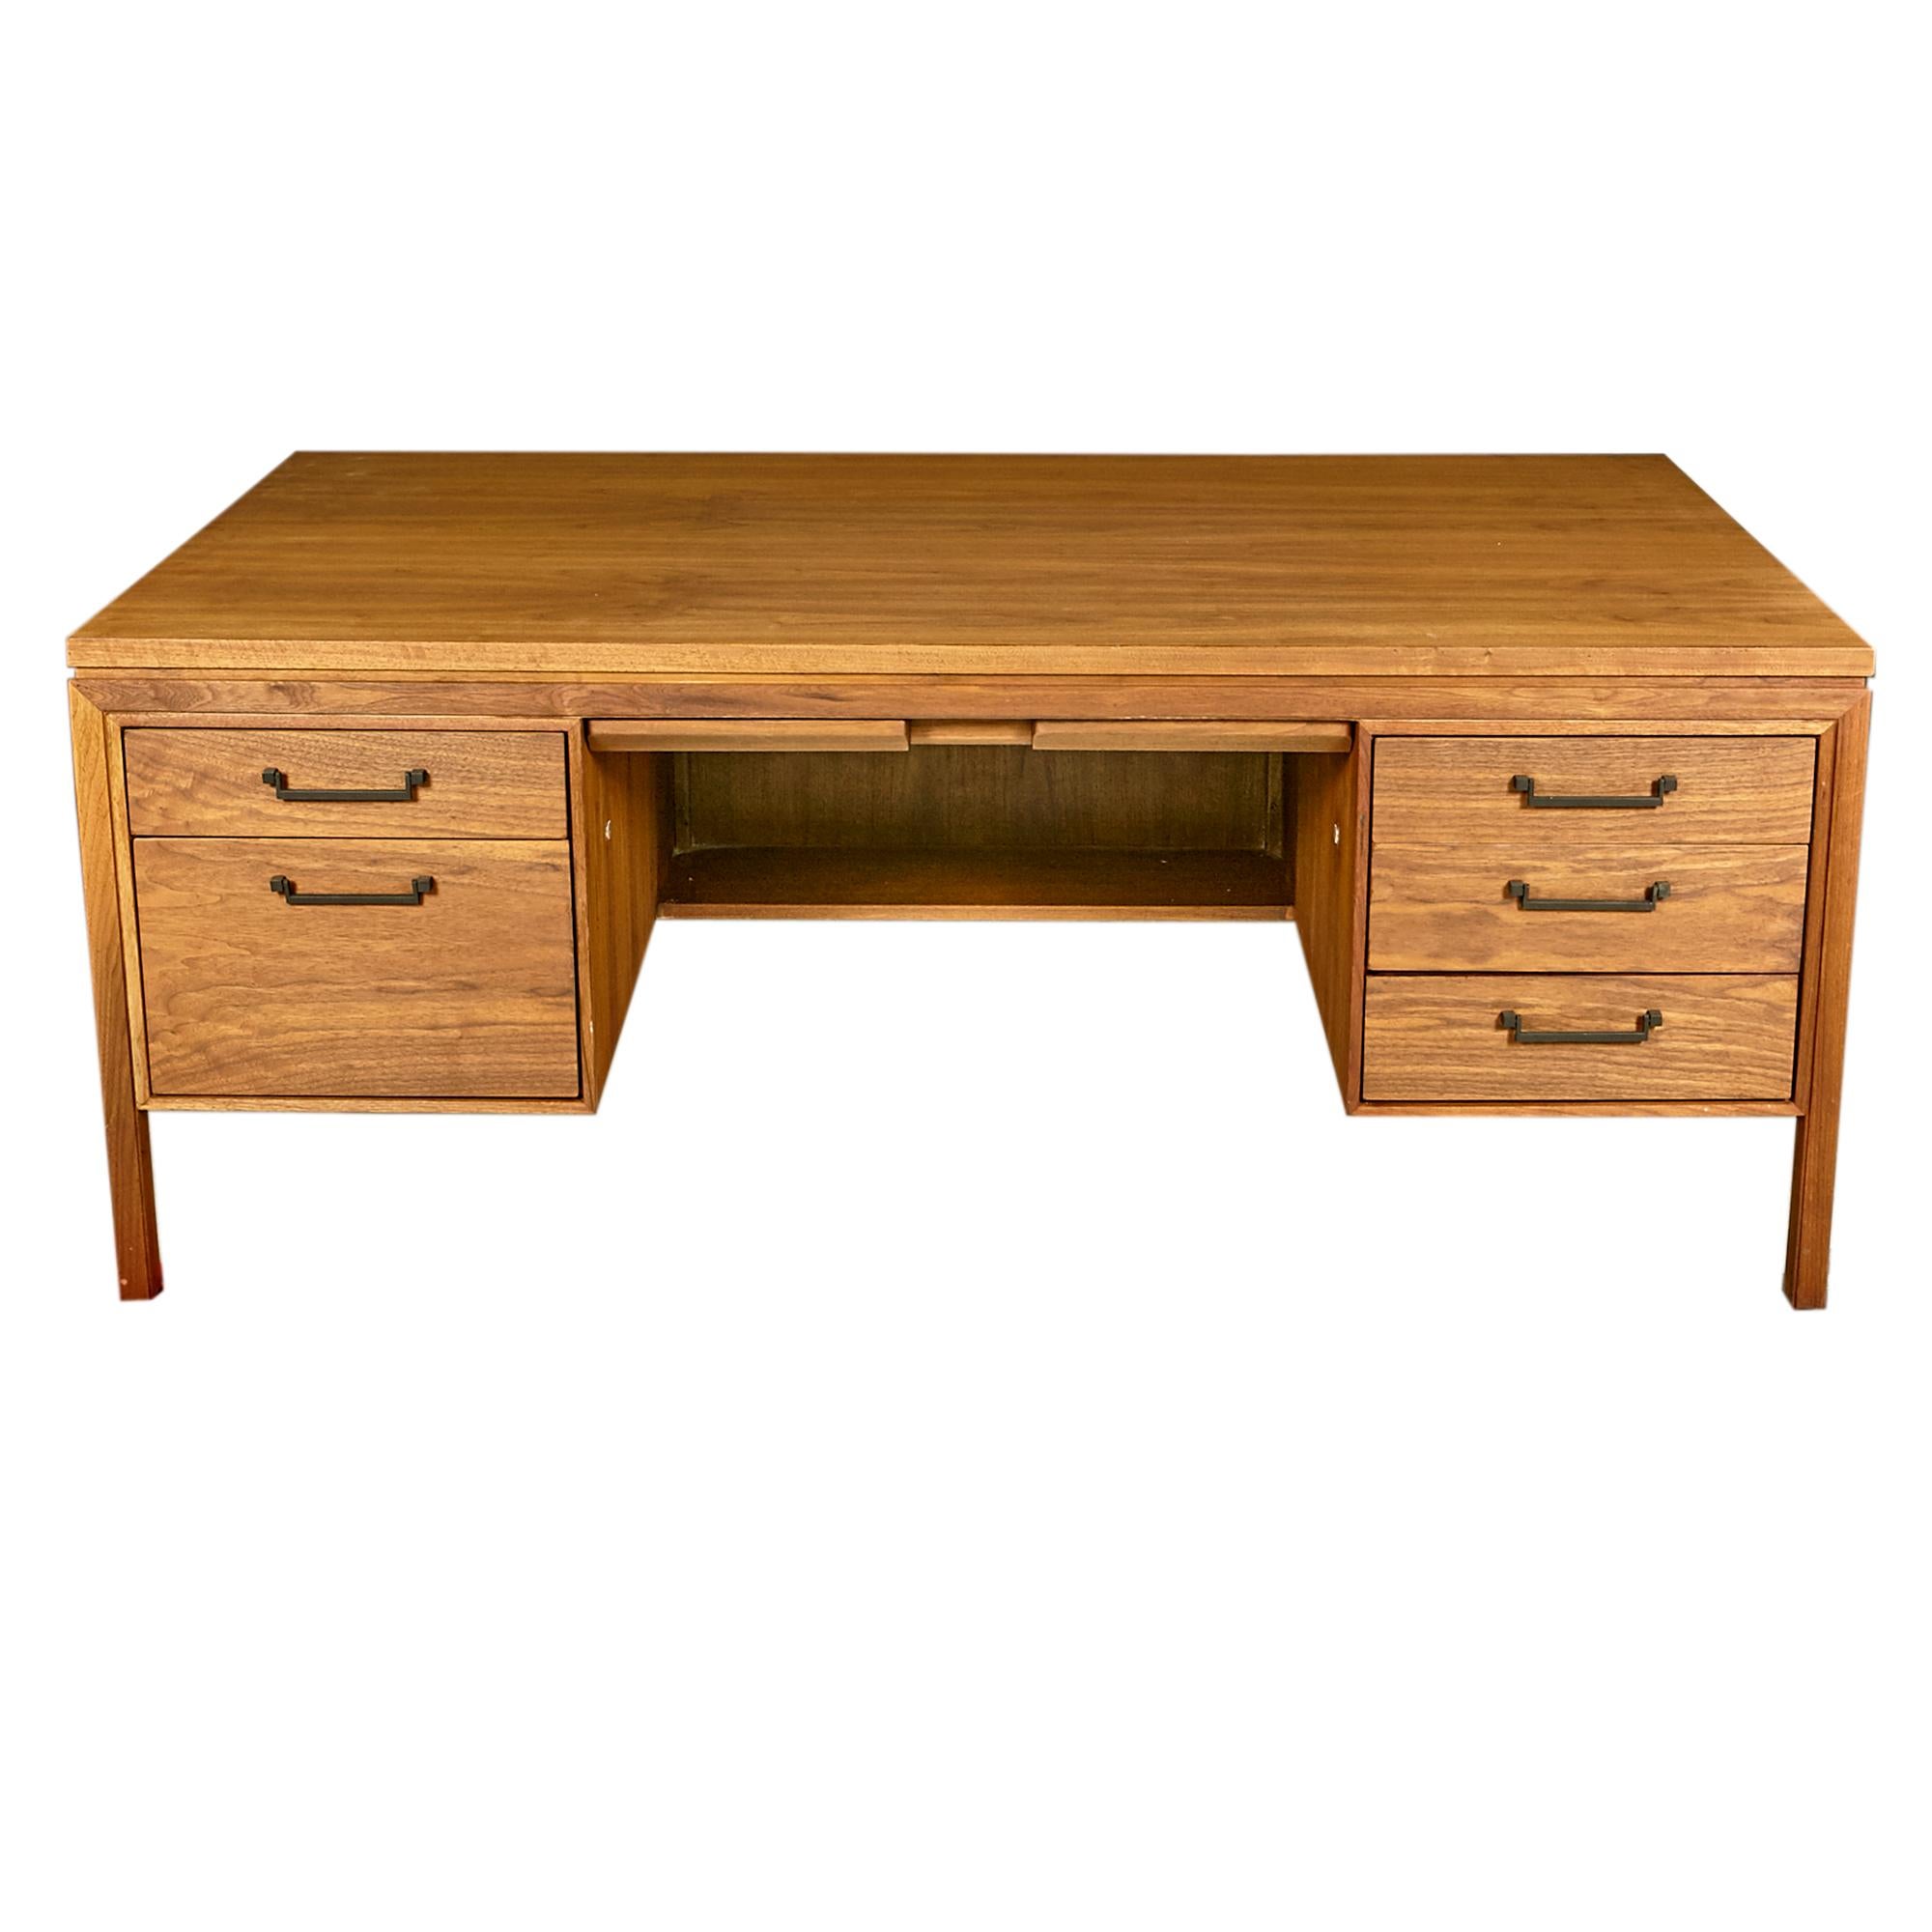 Vintage 1960s walnut wood double sided executive desk with black metal pulls. The desk has seven drawers for storage. In newly refinished condition. There are several scratches in the wood that remain. Marked.
 